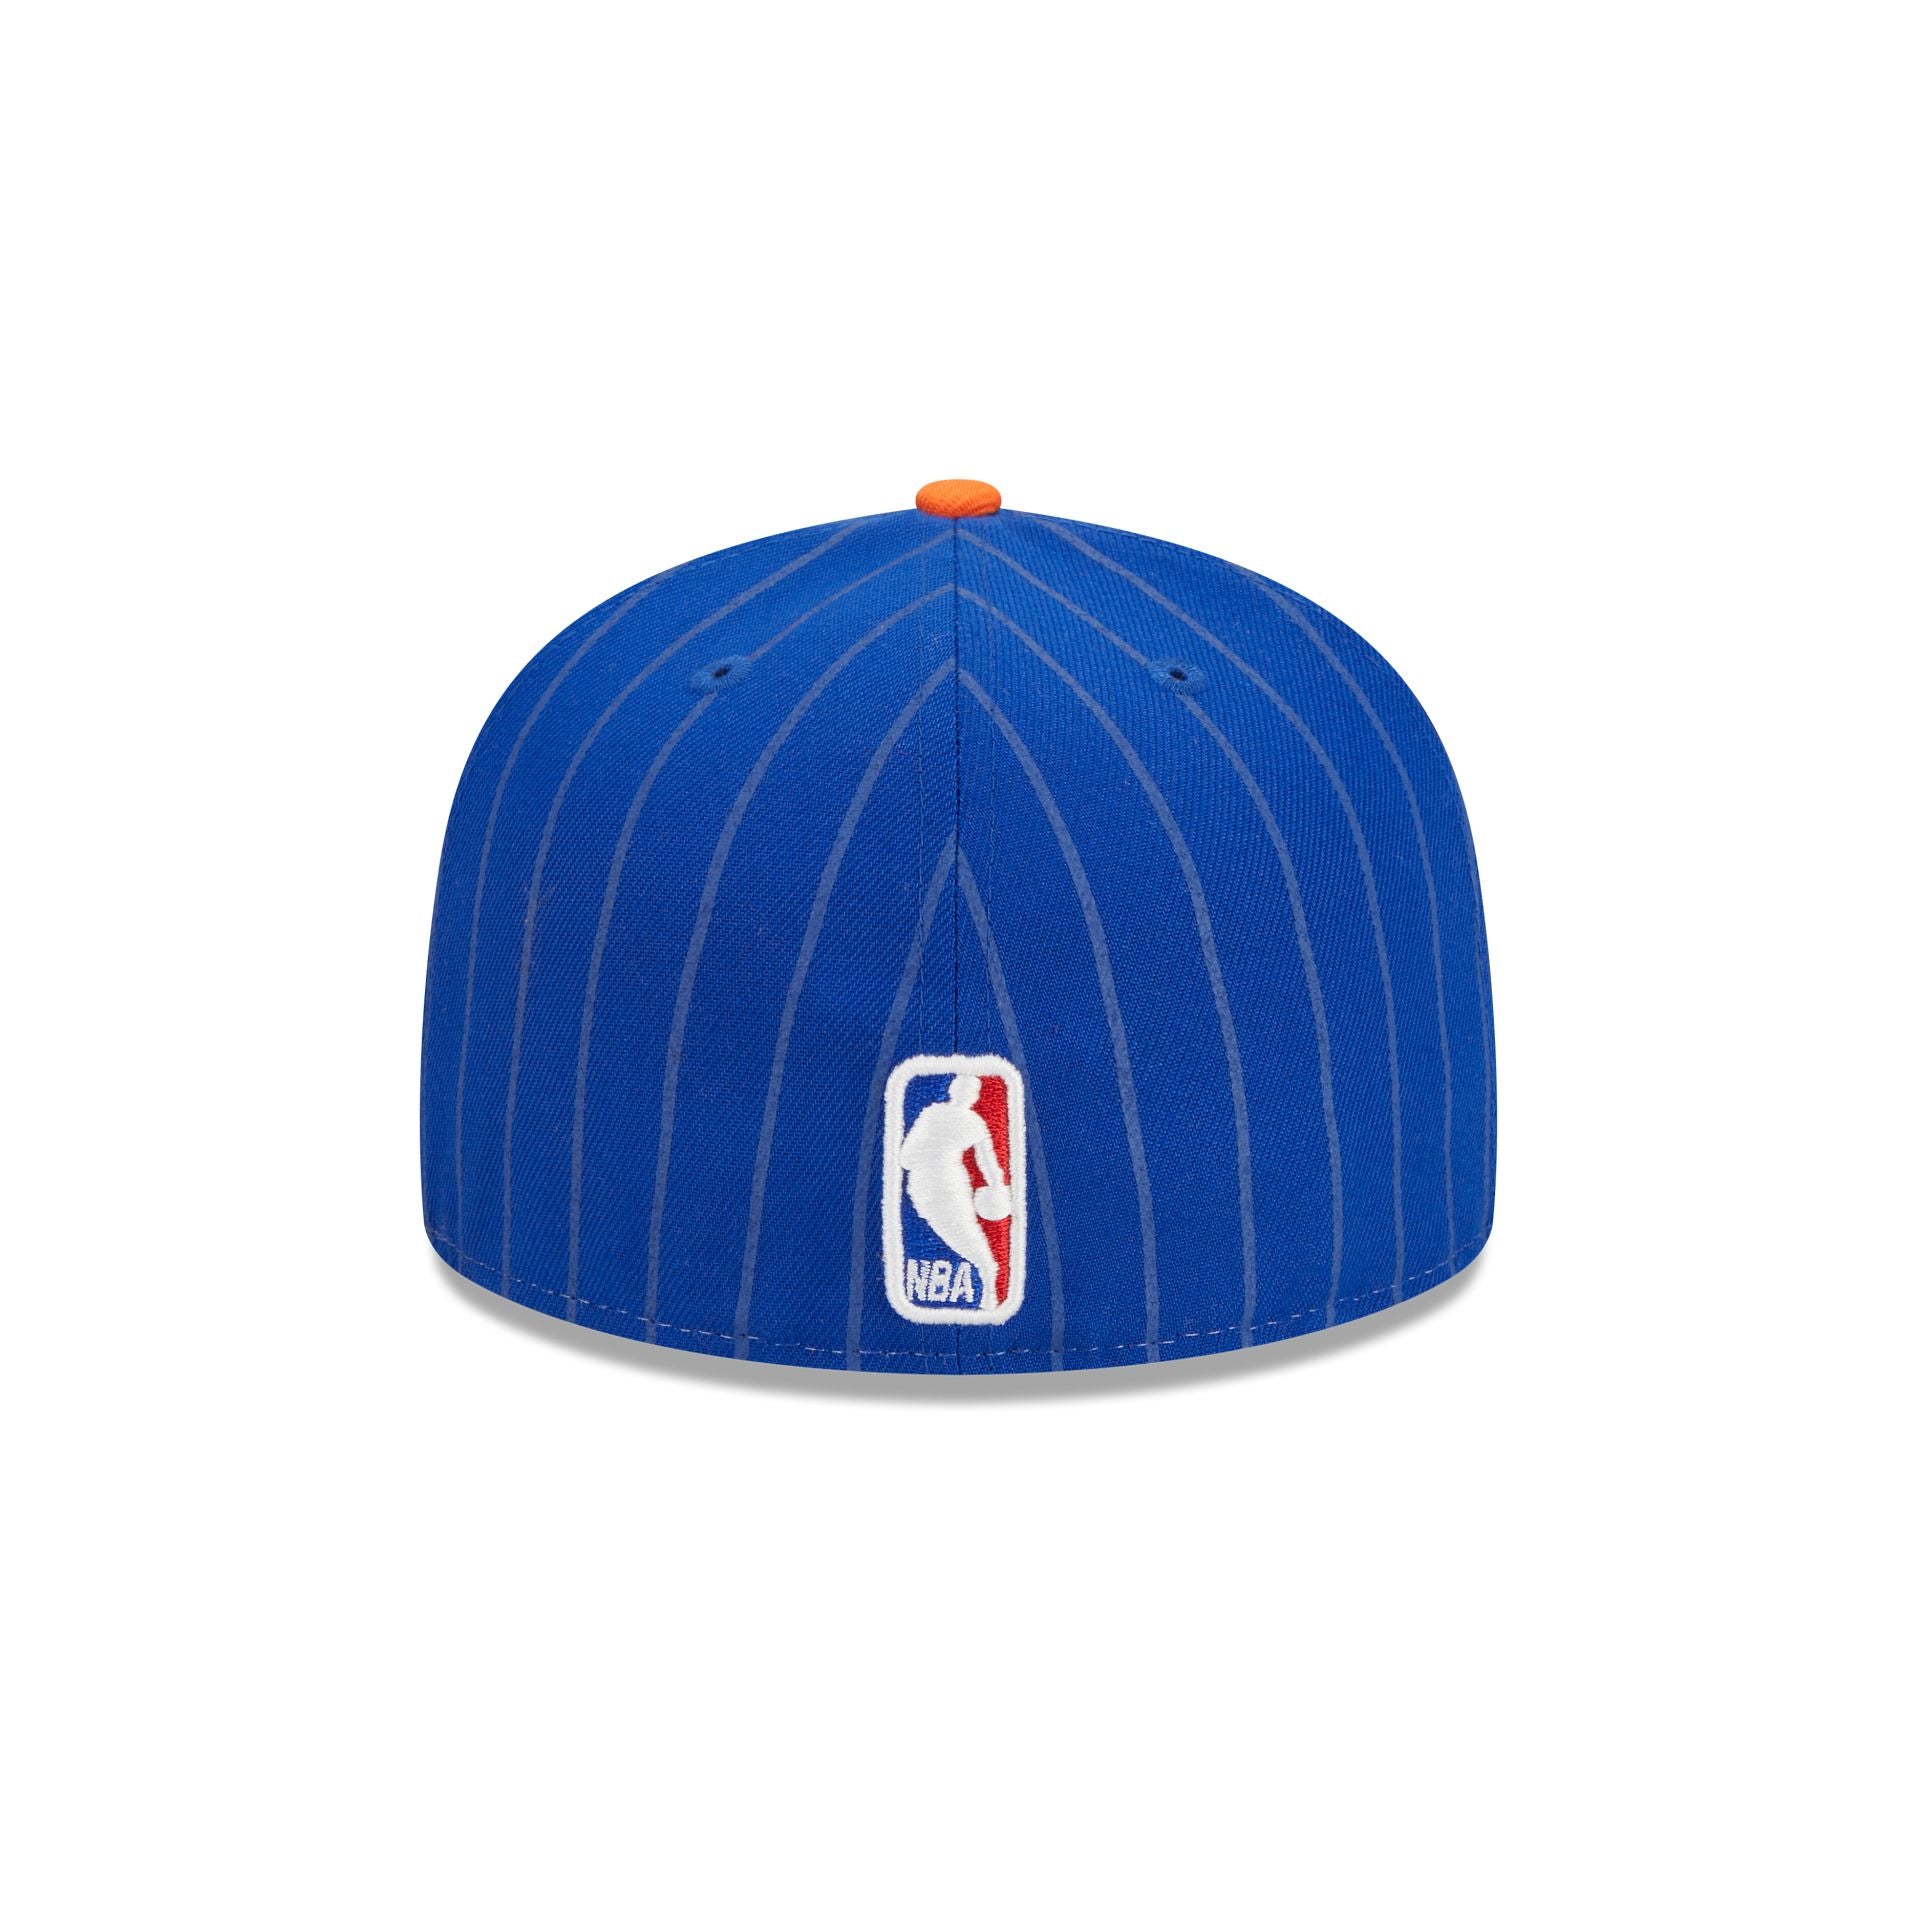 New York Knicks 2023 City Edition 59FIFTY Fitted Hat – New Era Cap